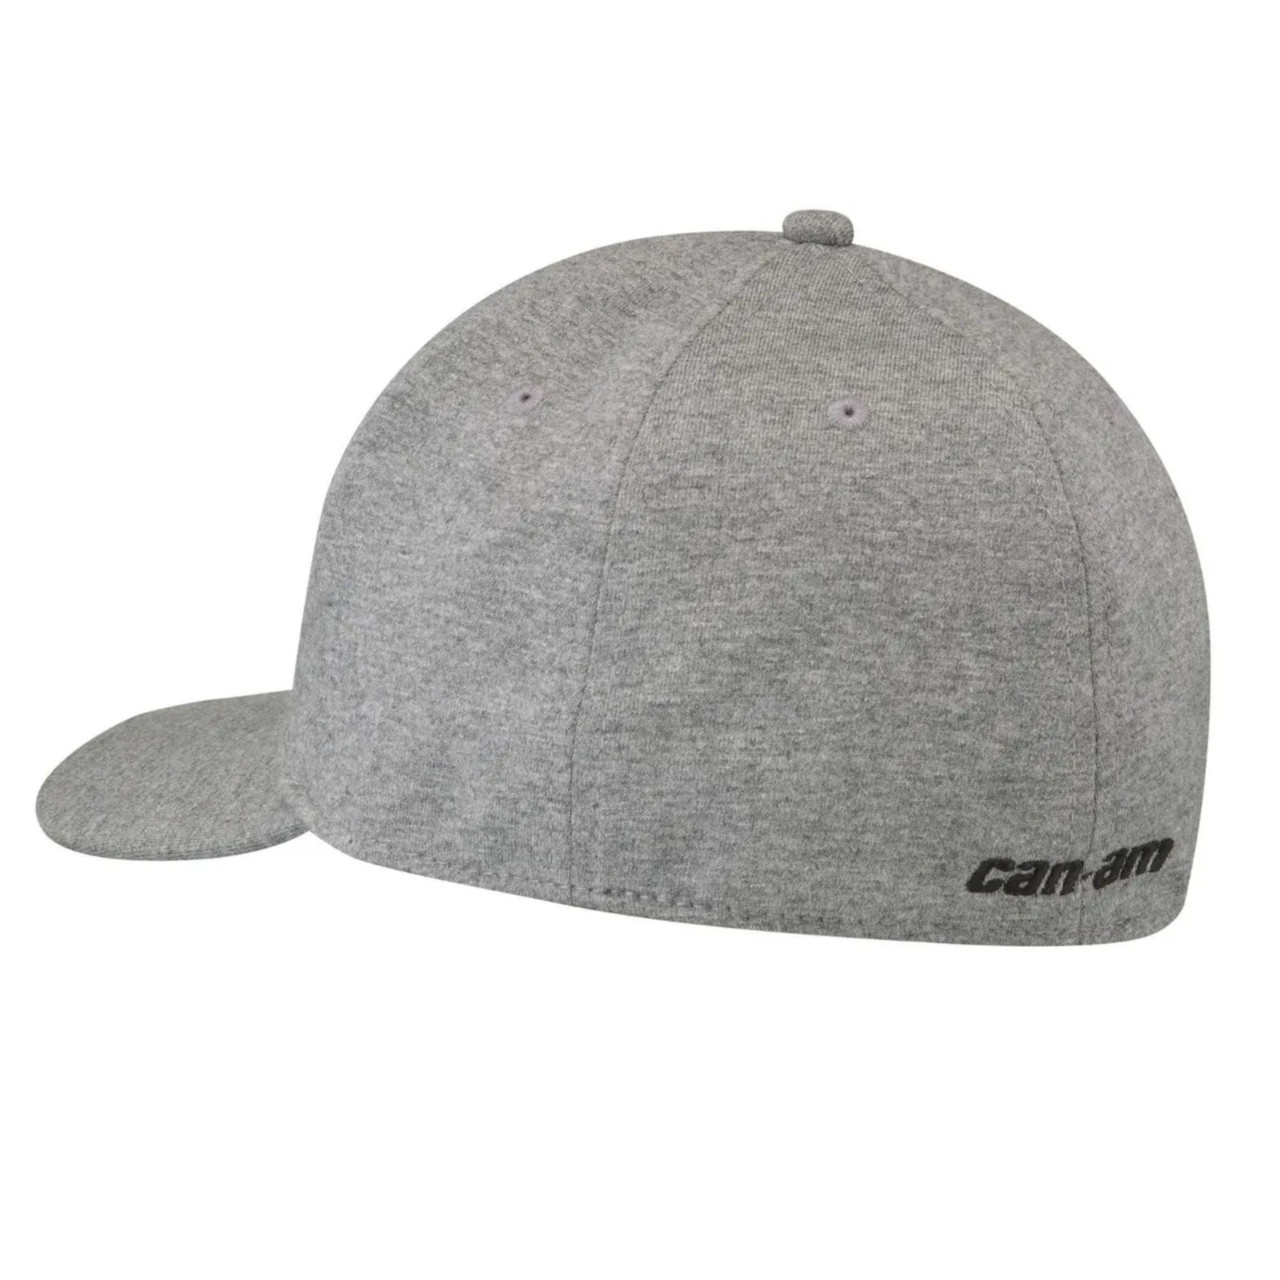 Can-Am New OEM, Unisex S/M Embroidered Branded Flex Fit Cap, 4545337227